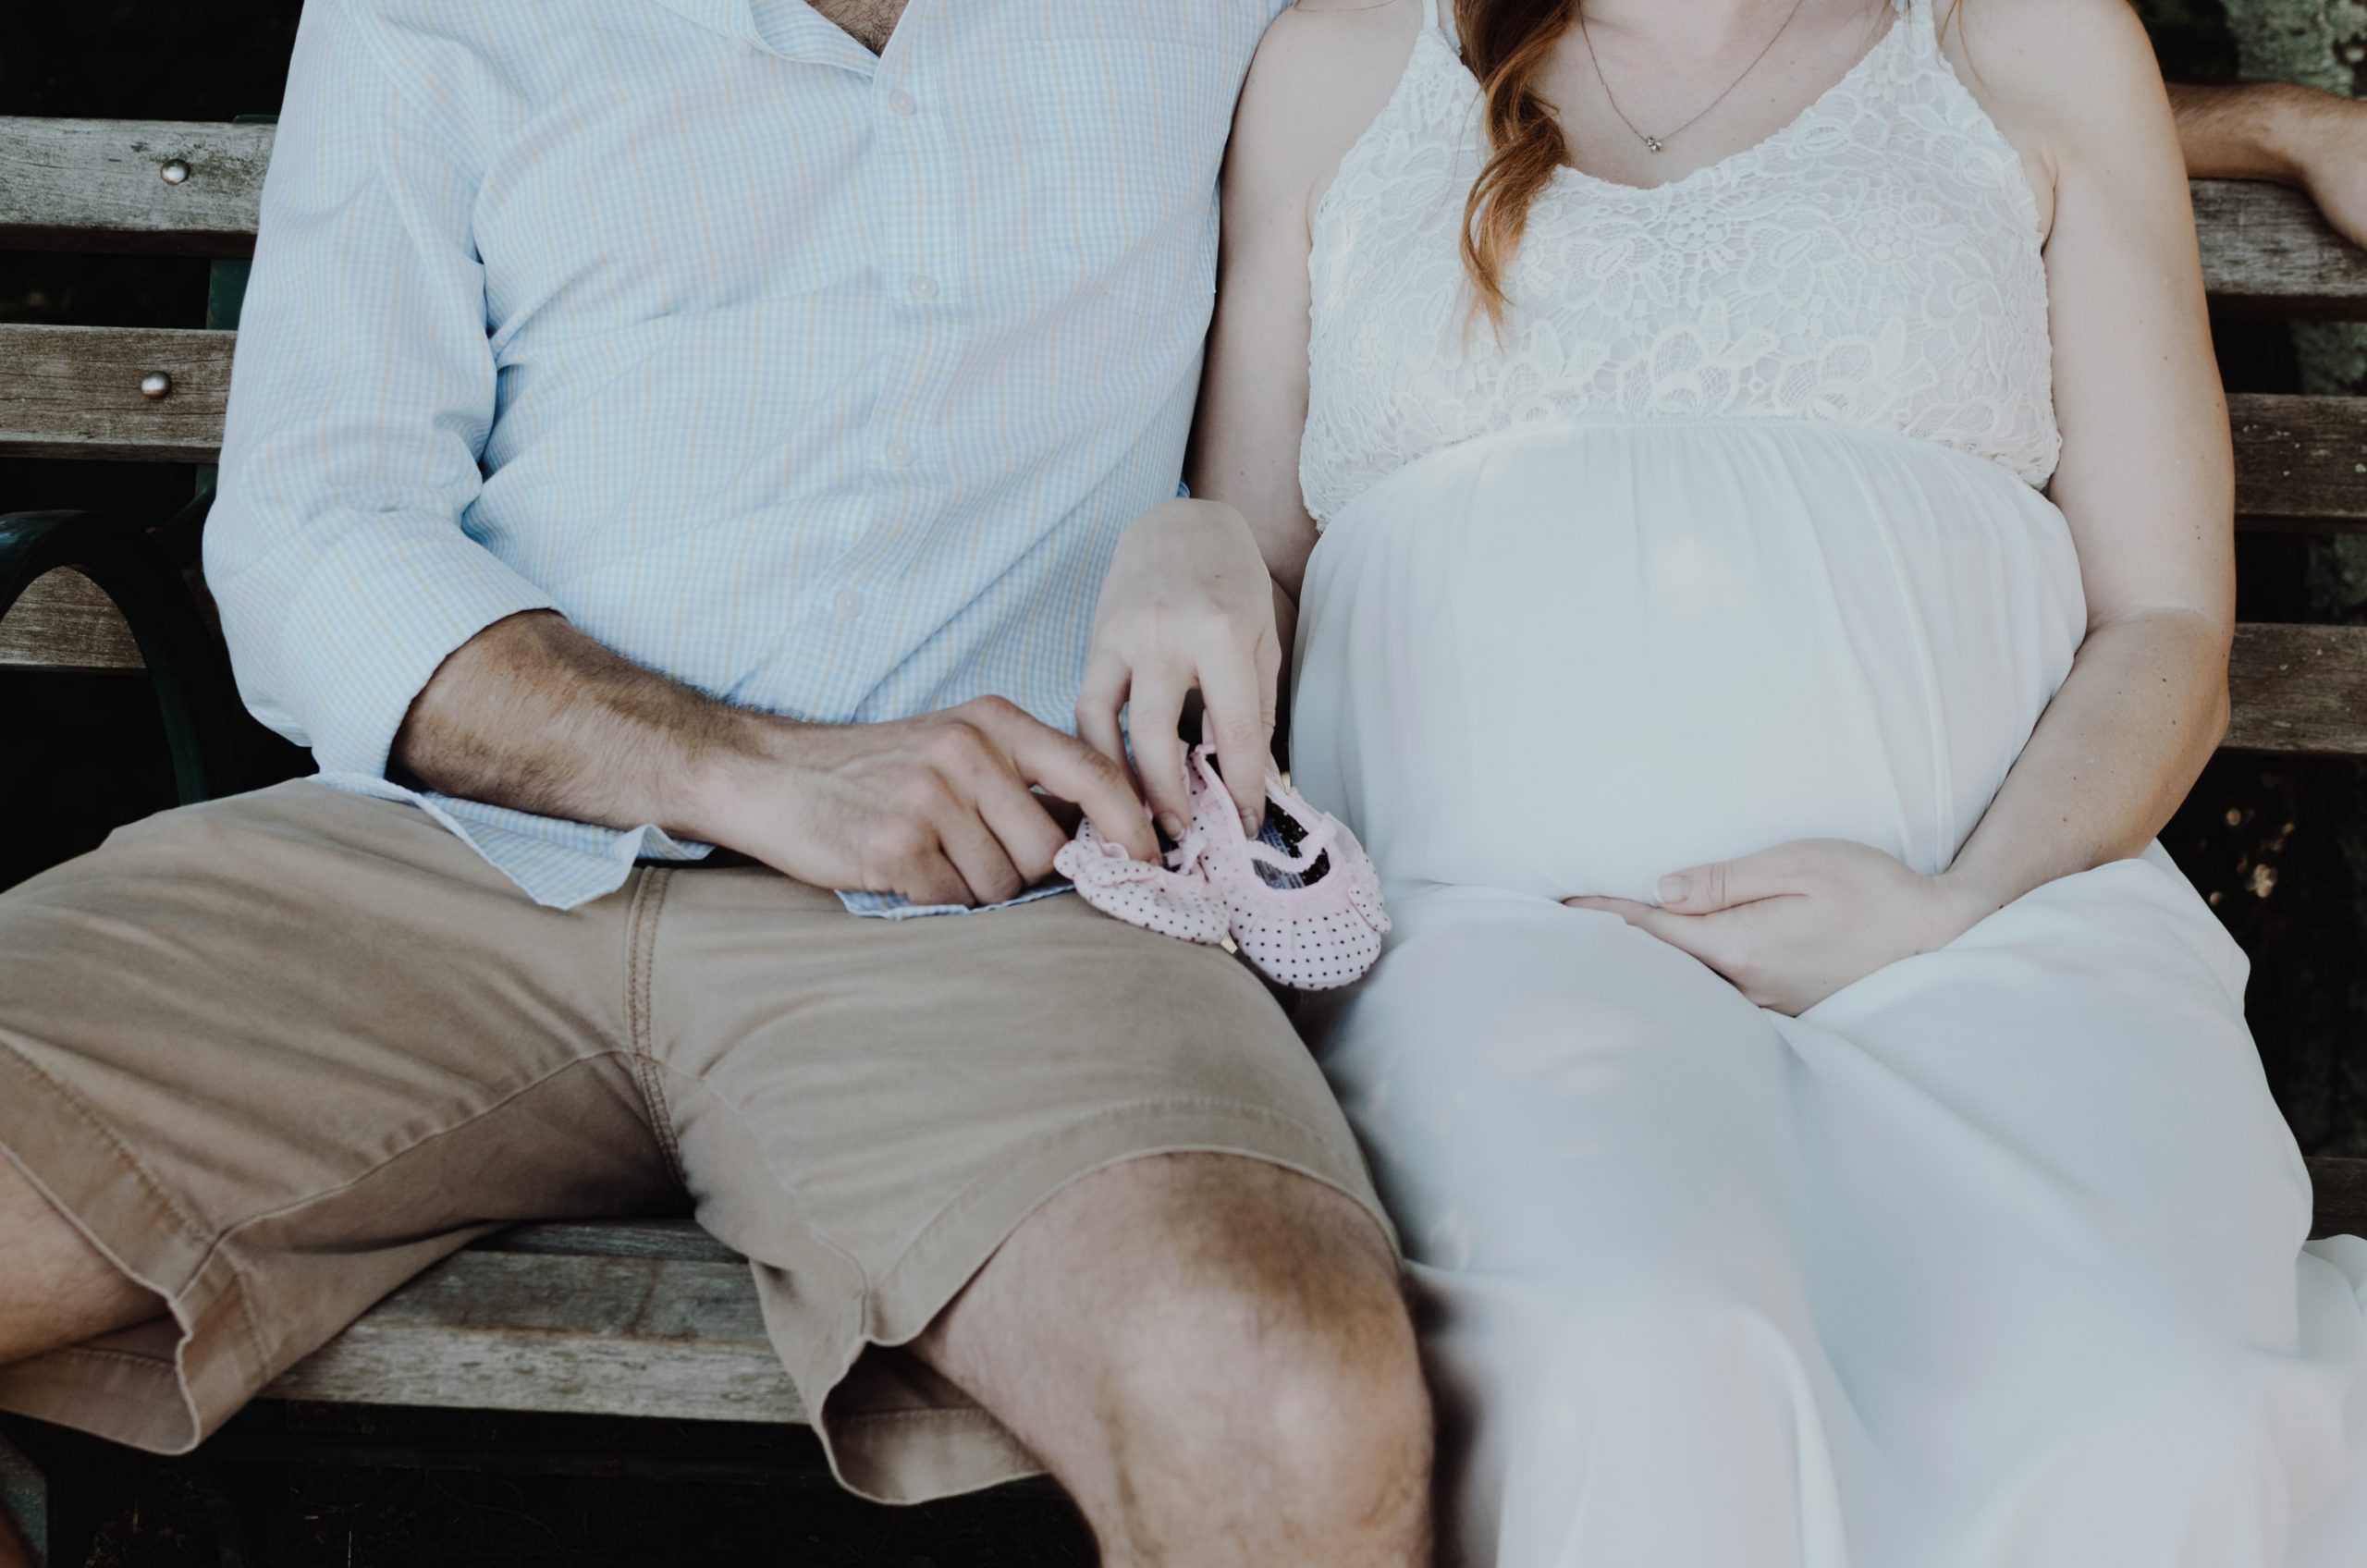 Torso of a pregnant couple sitting on the bench with children's shoes in their laps.